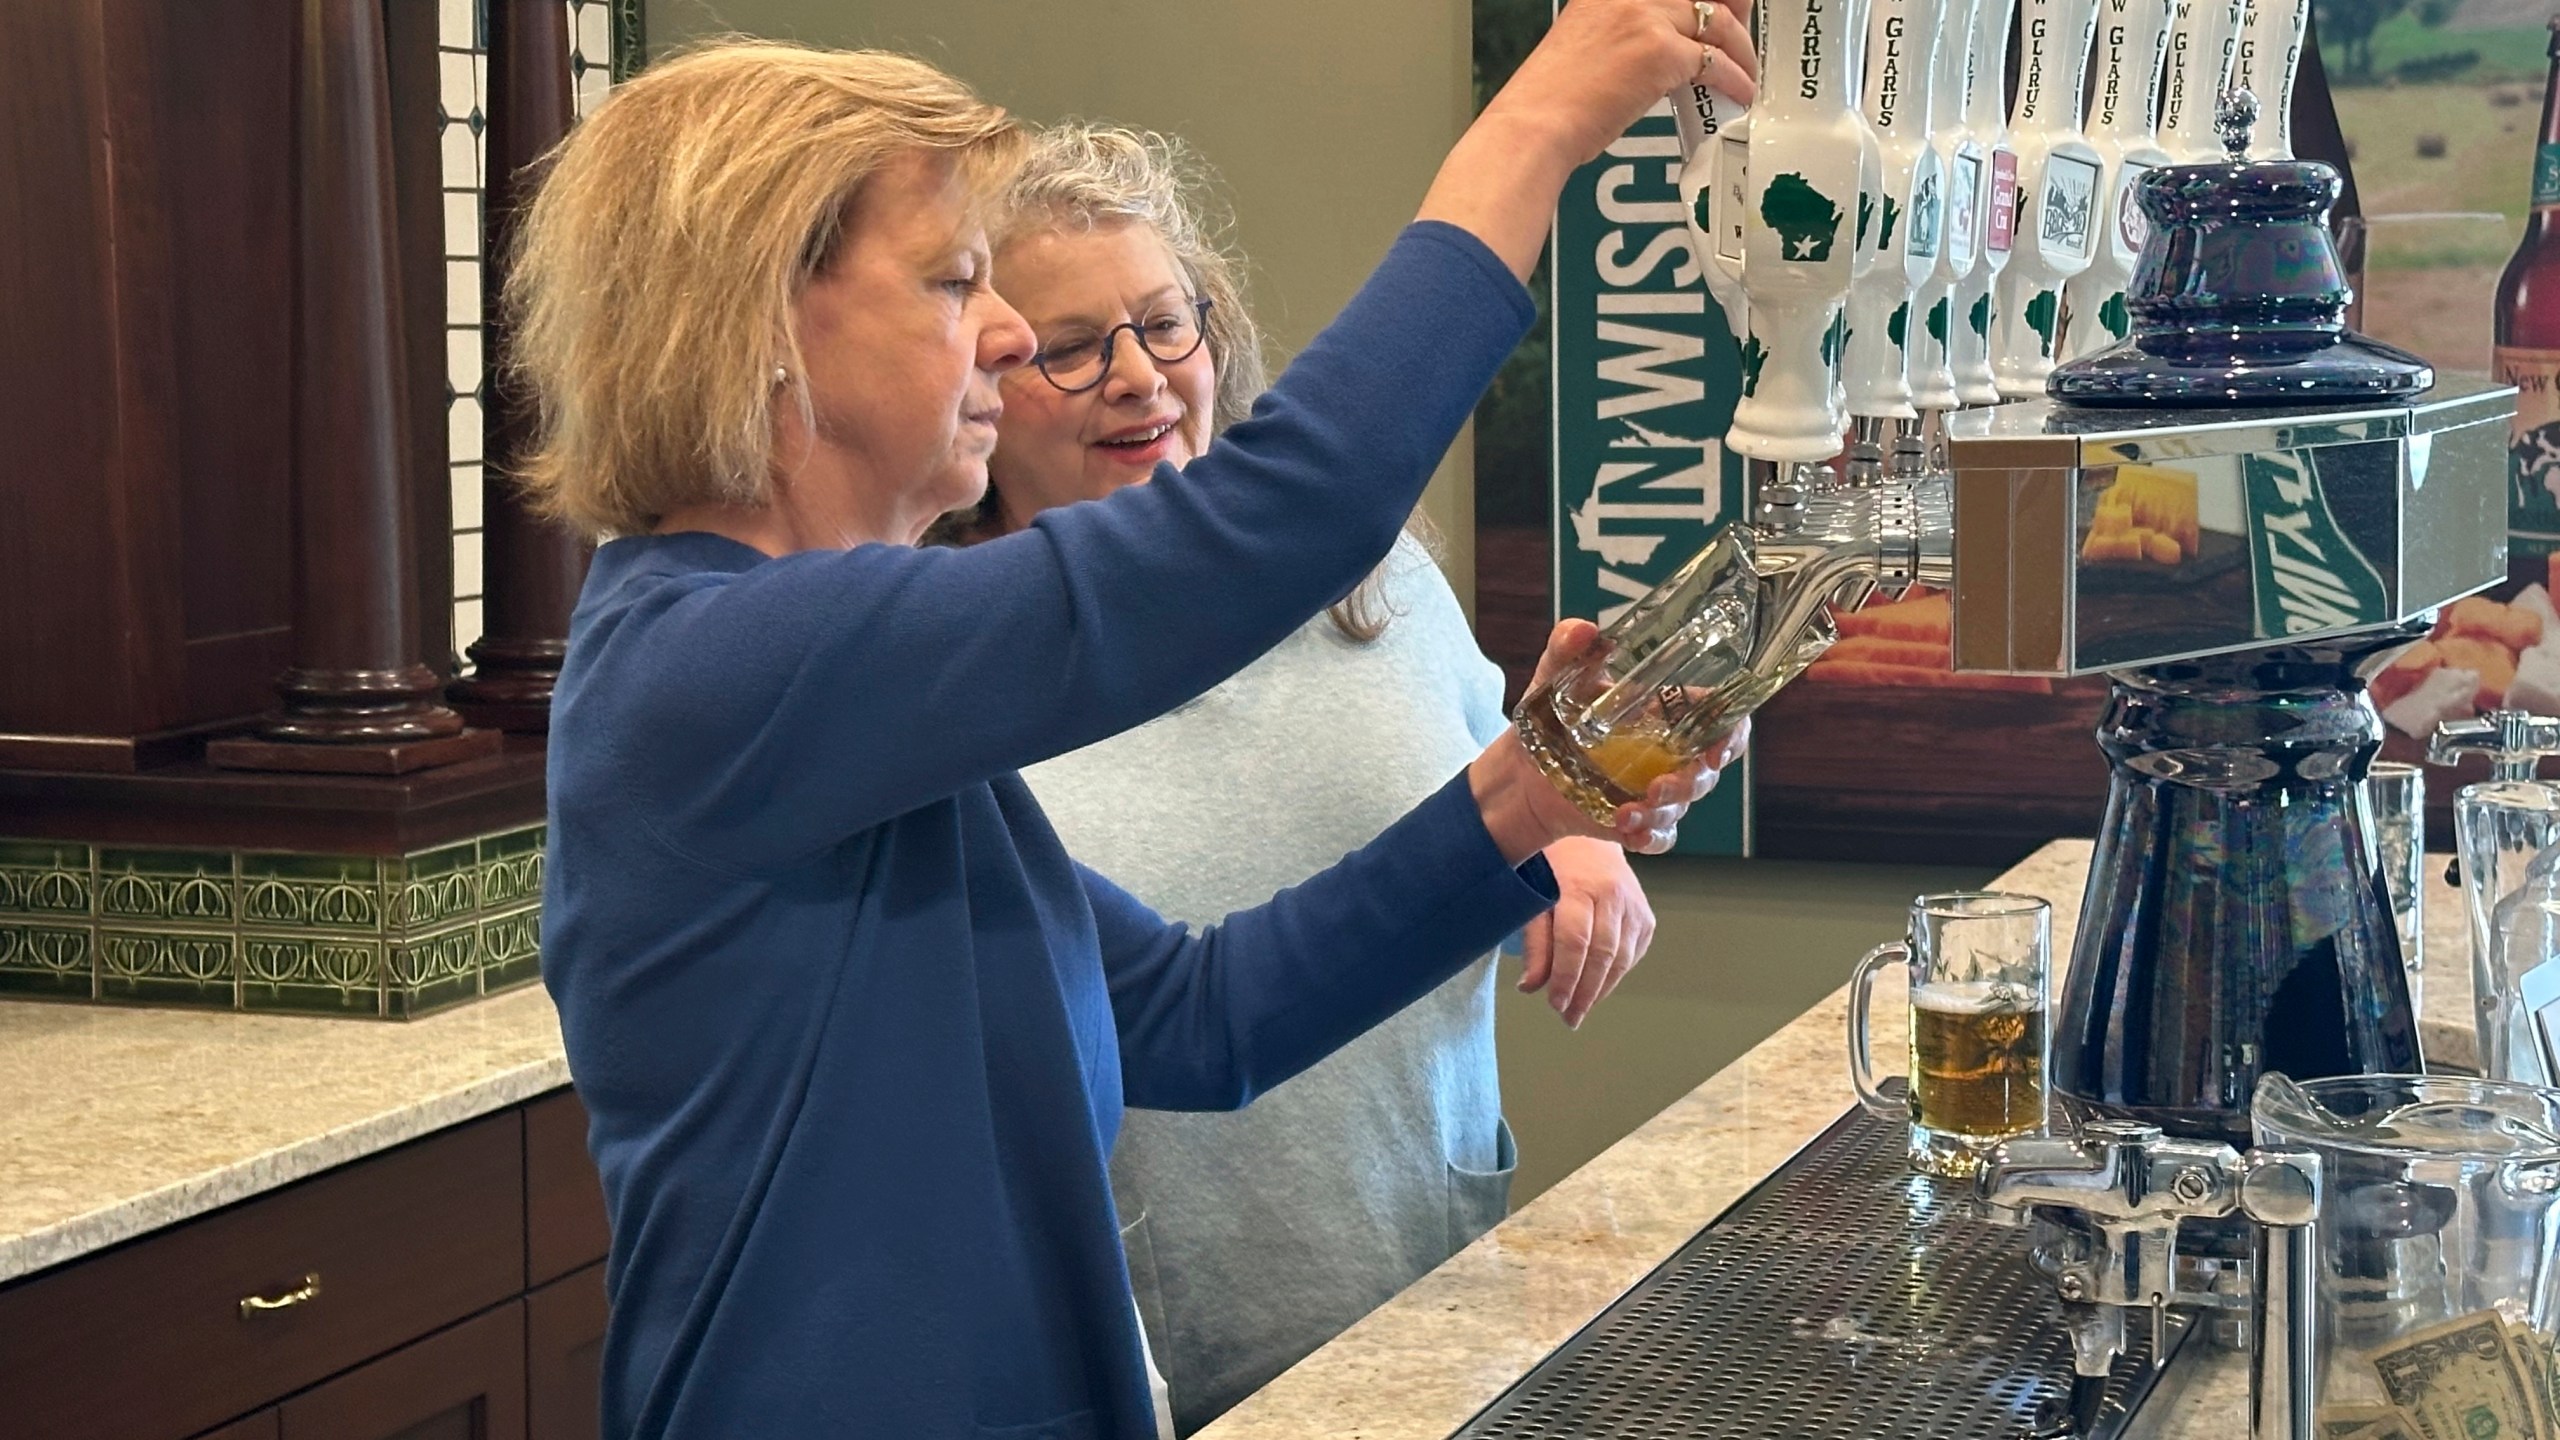 Wisconsin Democratic U.S. Sen. Tammy Baldwin talks to New Glarus Brewing Company co-owner Deb Carey during a campaign stop, Thursday, March 28, 2024, in New Glarus, Wis. The stop was part of her campaign launch tour in a race against Republican Eric Hovde the could determine who has majority control of the Senate. The Wisconsin Senate race between Democratic Sen. Tammy Baldwin and Republican Eric Hovde is setting up as one of the most competitive and expensive Senate races in the country. (AP Photo/Scott Bauer)